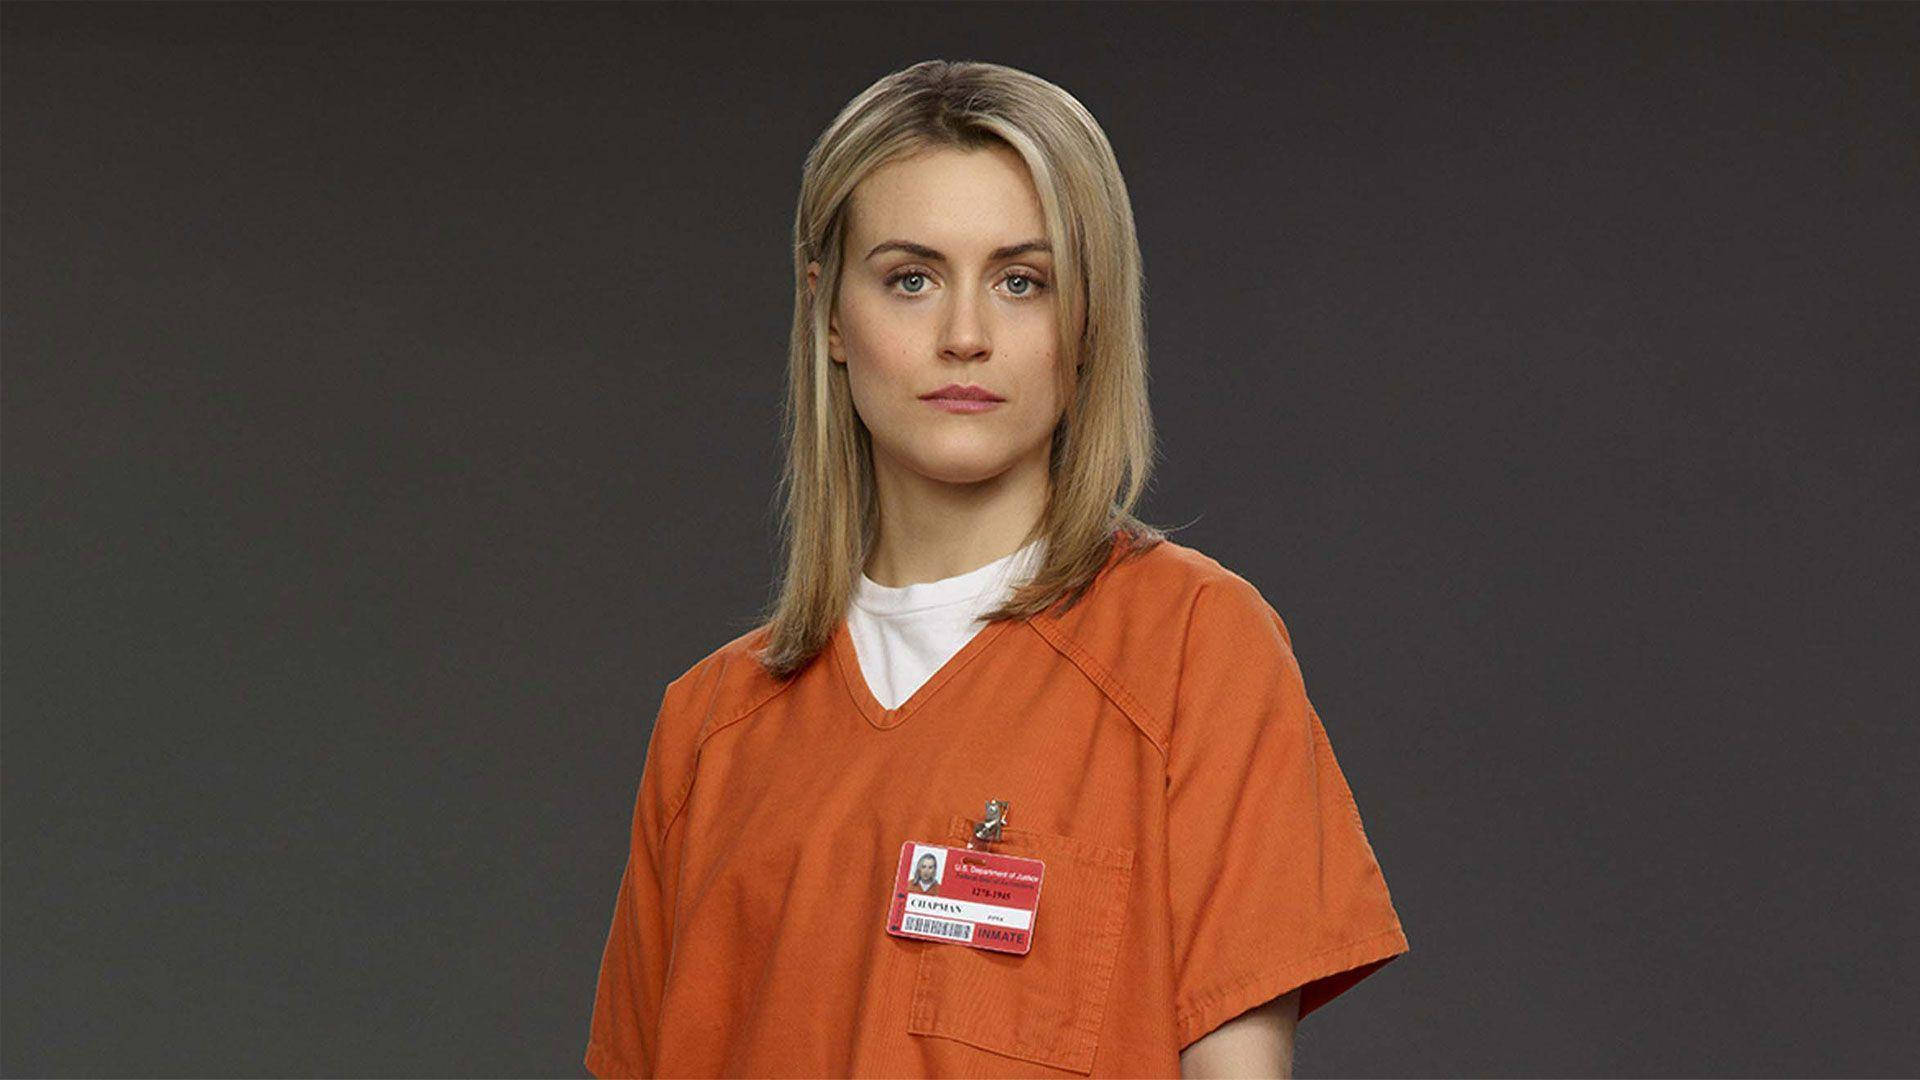 Orangeis The New Black Piper Chapman Would Be Translated To 